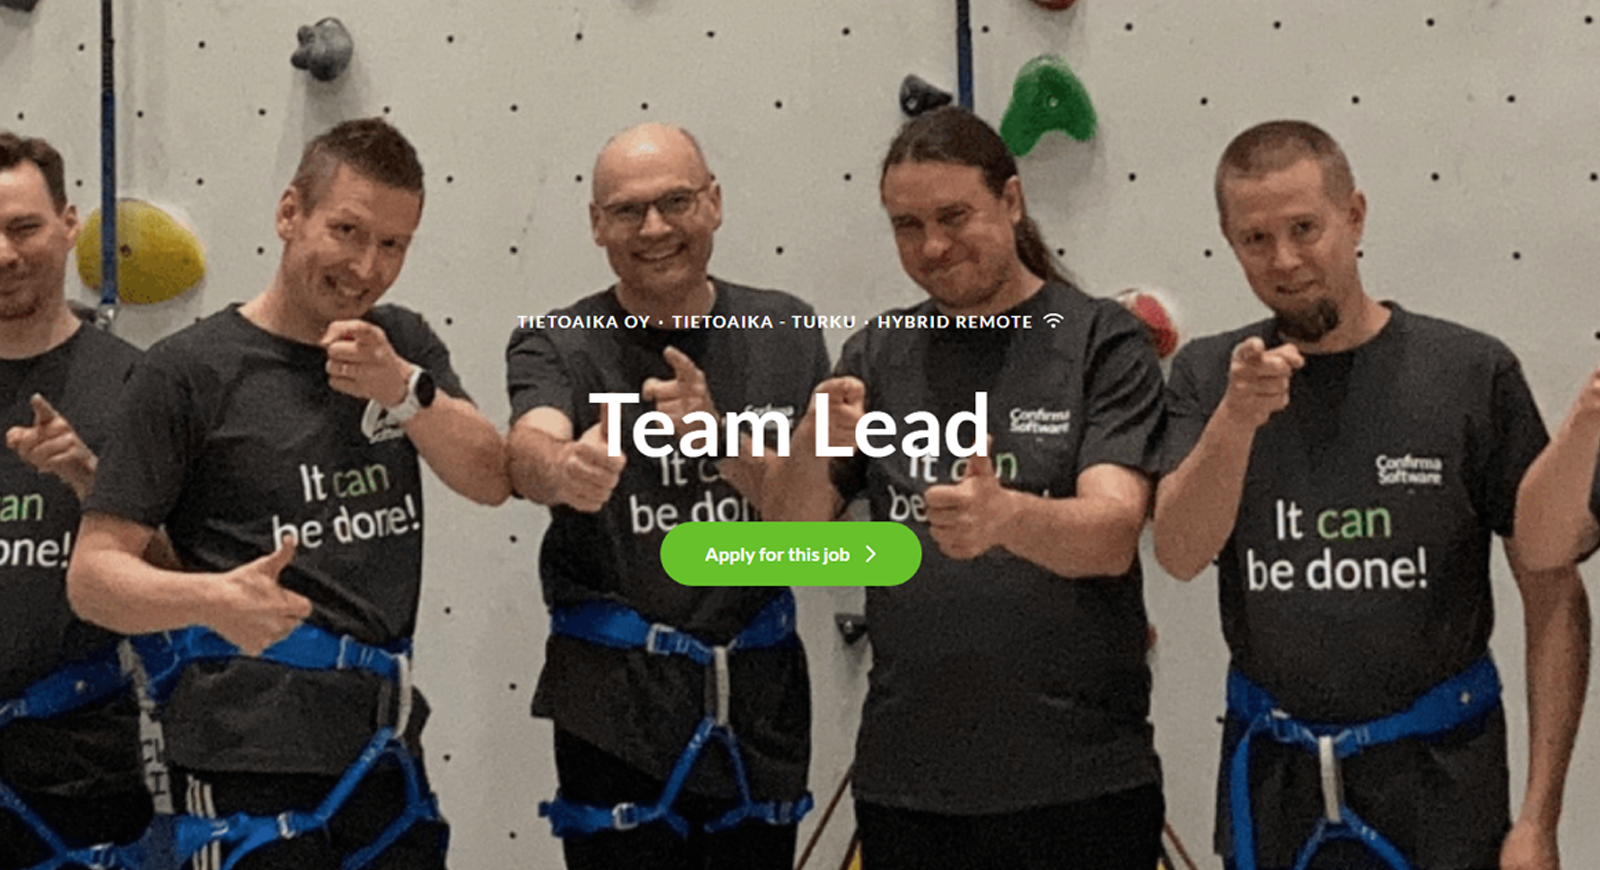 Tietoaika is looking for a Team Lead